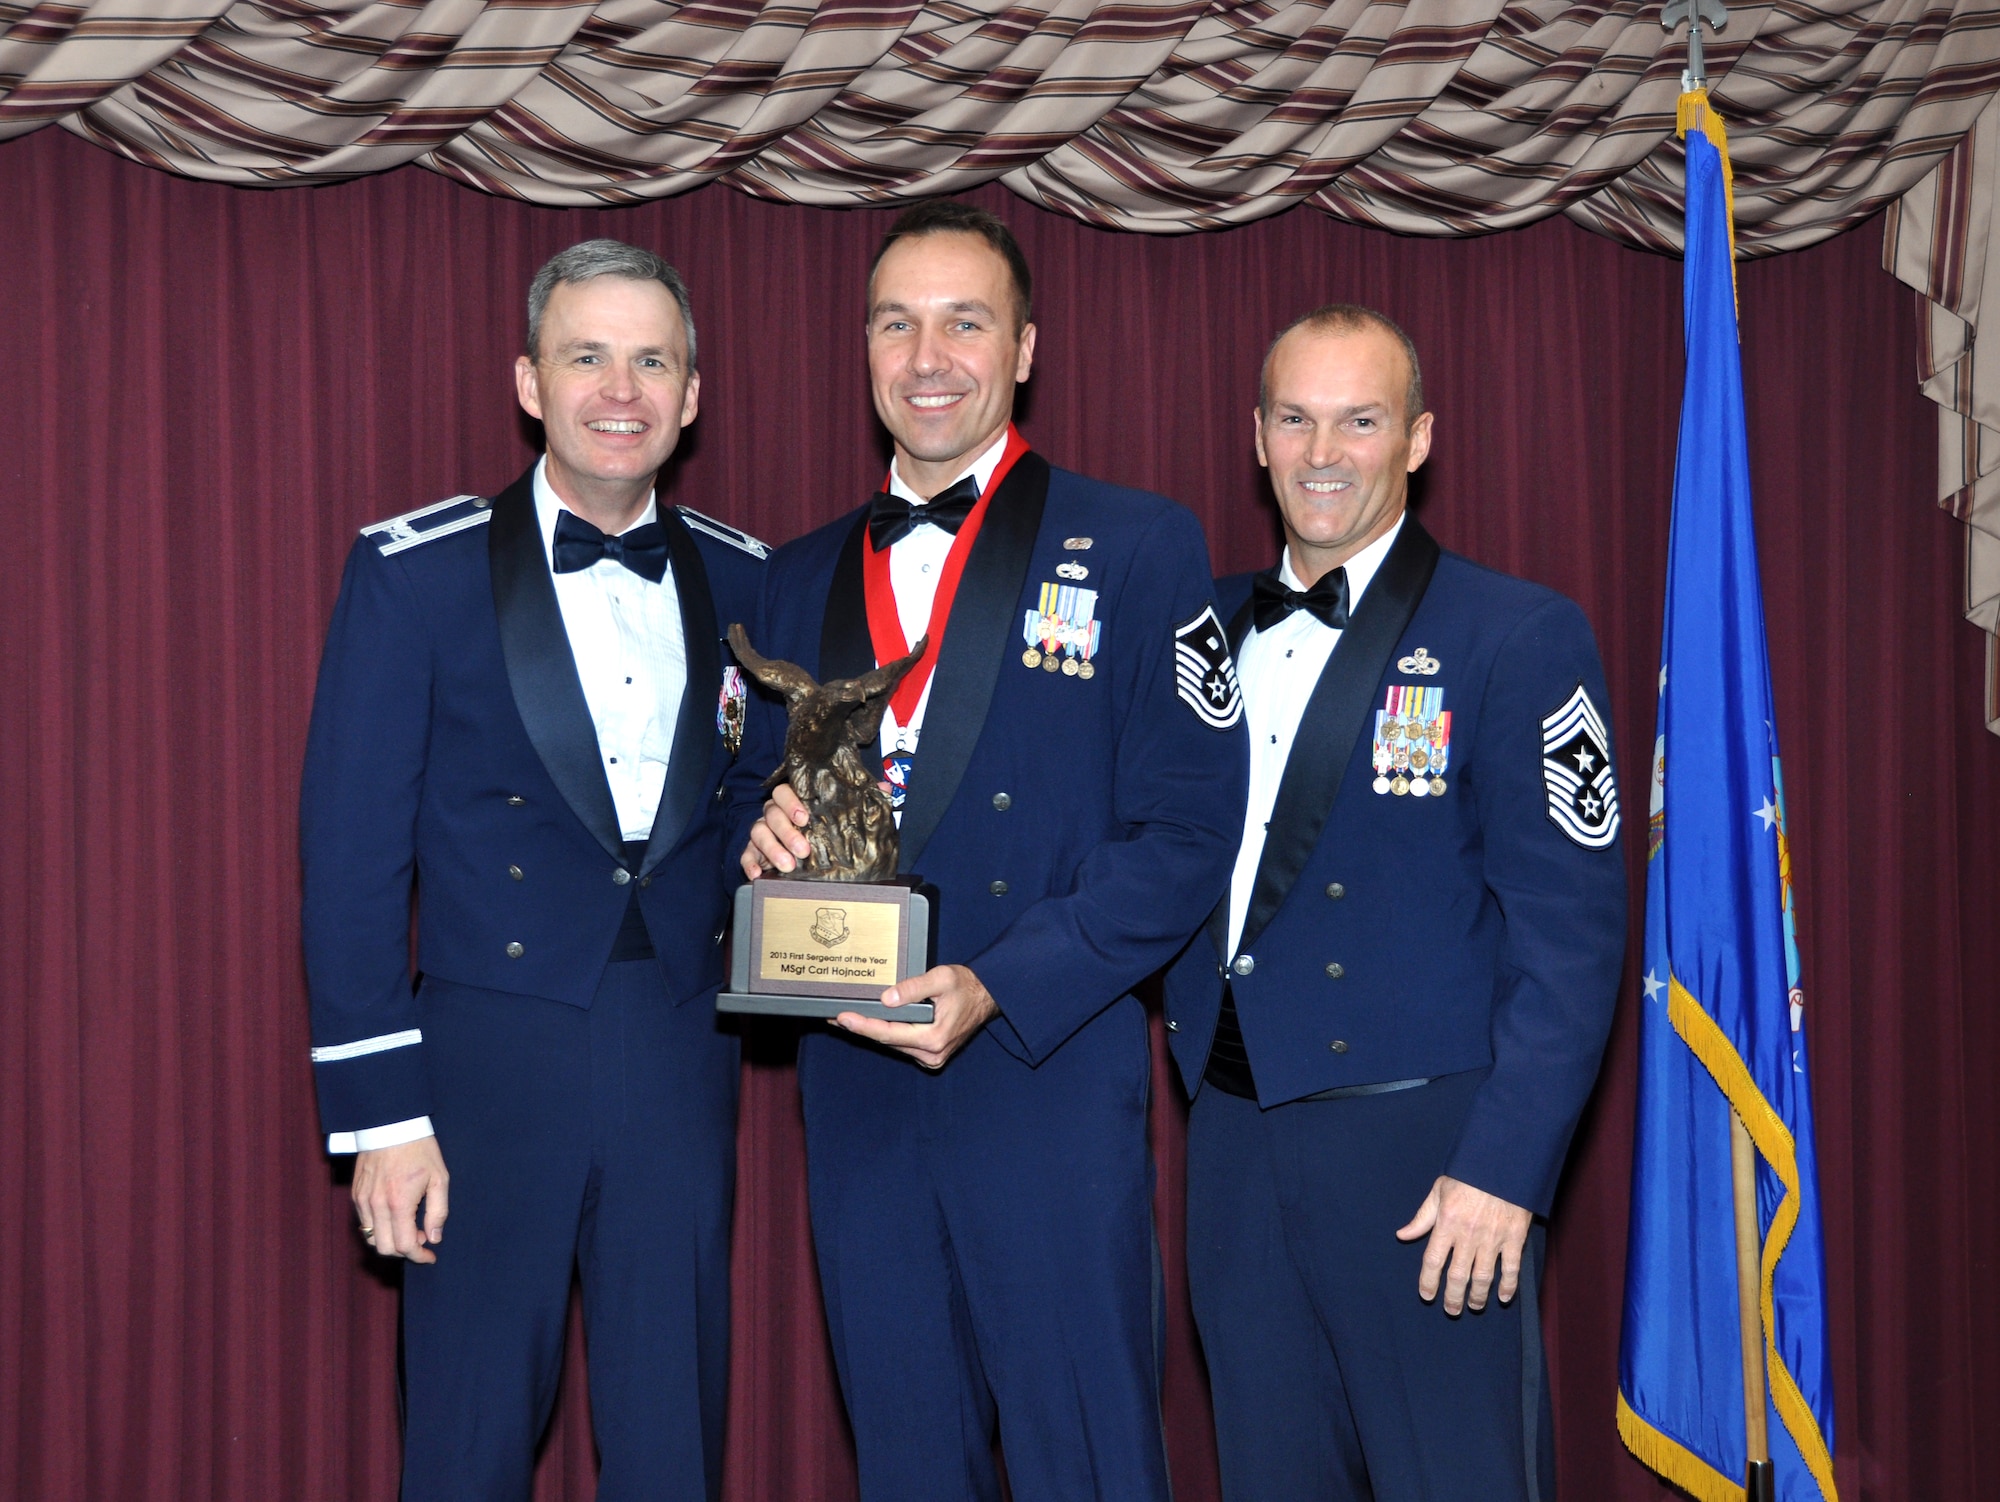 Master Sgt. Carl Hojnacki receives the First Sergeant of the Year Award from 507th Air Refueling Wing acting Commander, Col. Kevin Trayer, left and 507th ARW Command Chief, Chief Master Sgt. Steven Brown during the annual awards banquet at the Tinker club Nov. 23, 2013.  (U.S. Air Force photo/Senior Airman Mark Hybers)